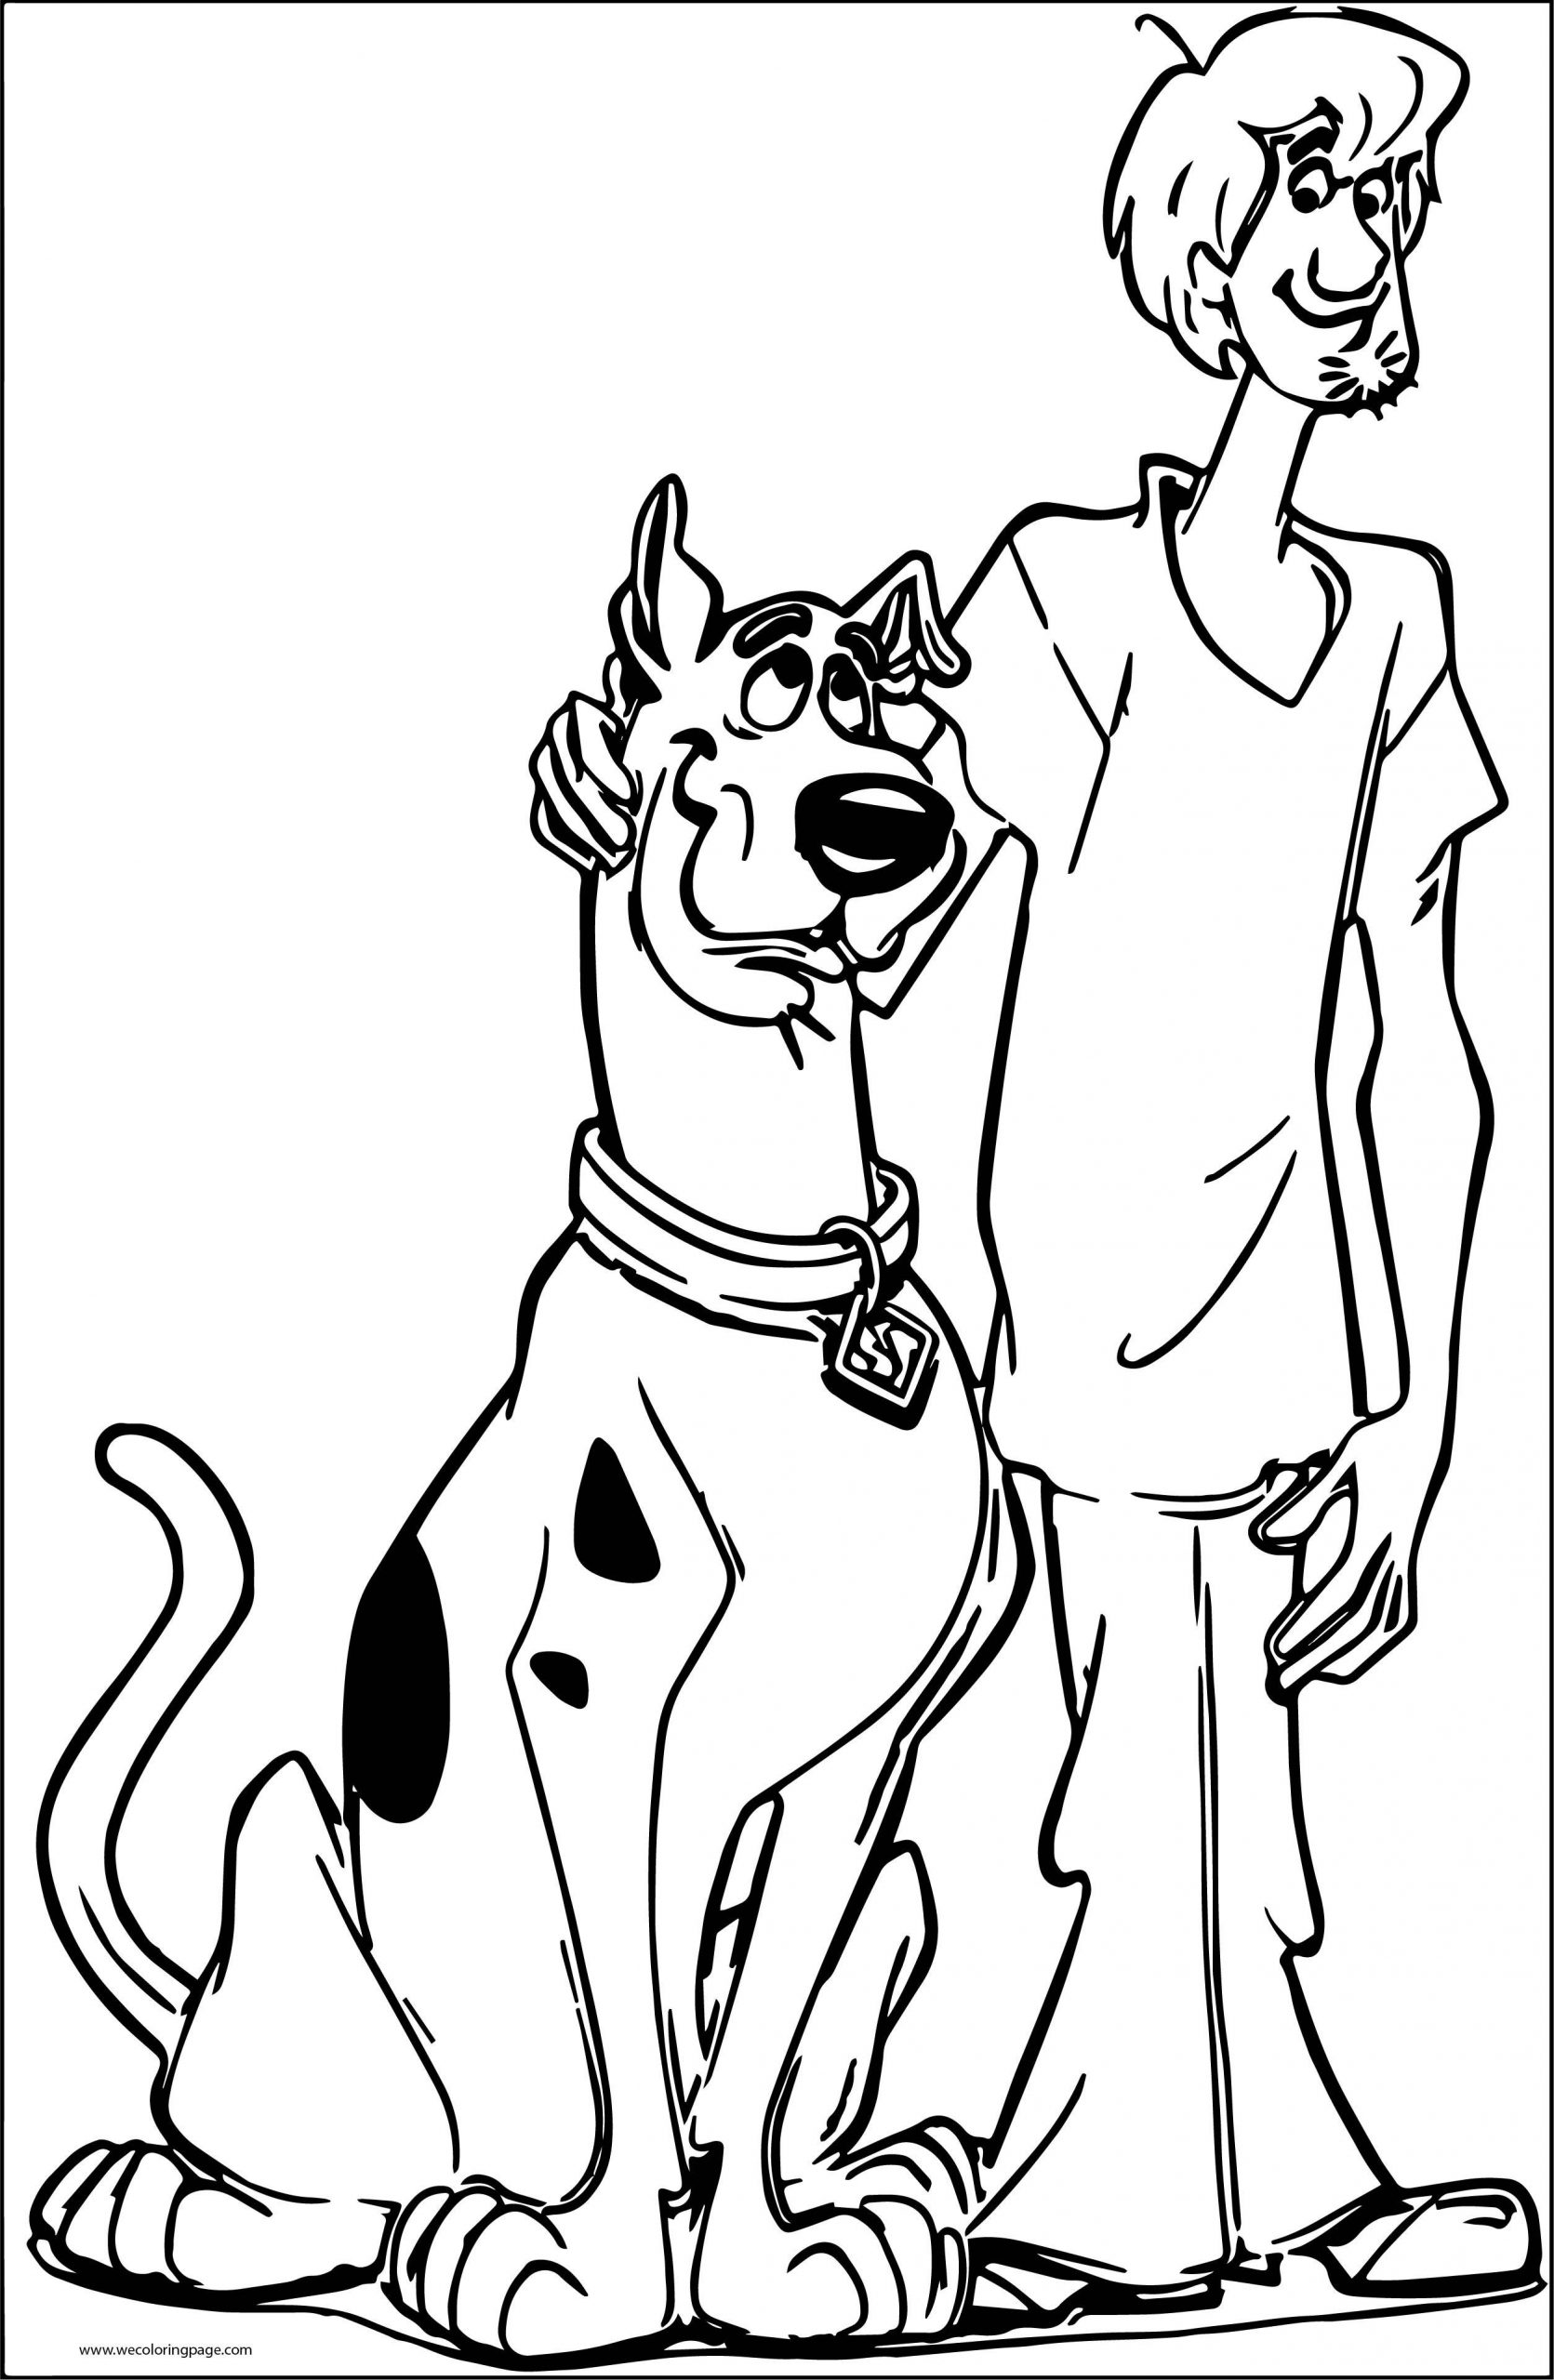 Coloring Pages | Scooby Doo Coloring Pages Snoopy To Print Free Kid